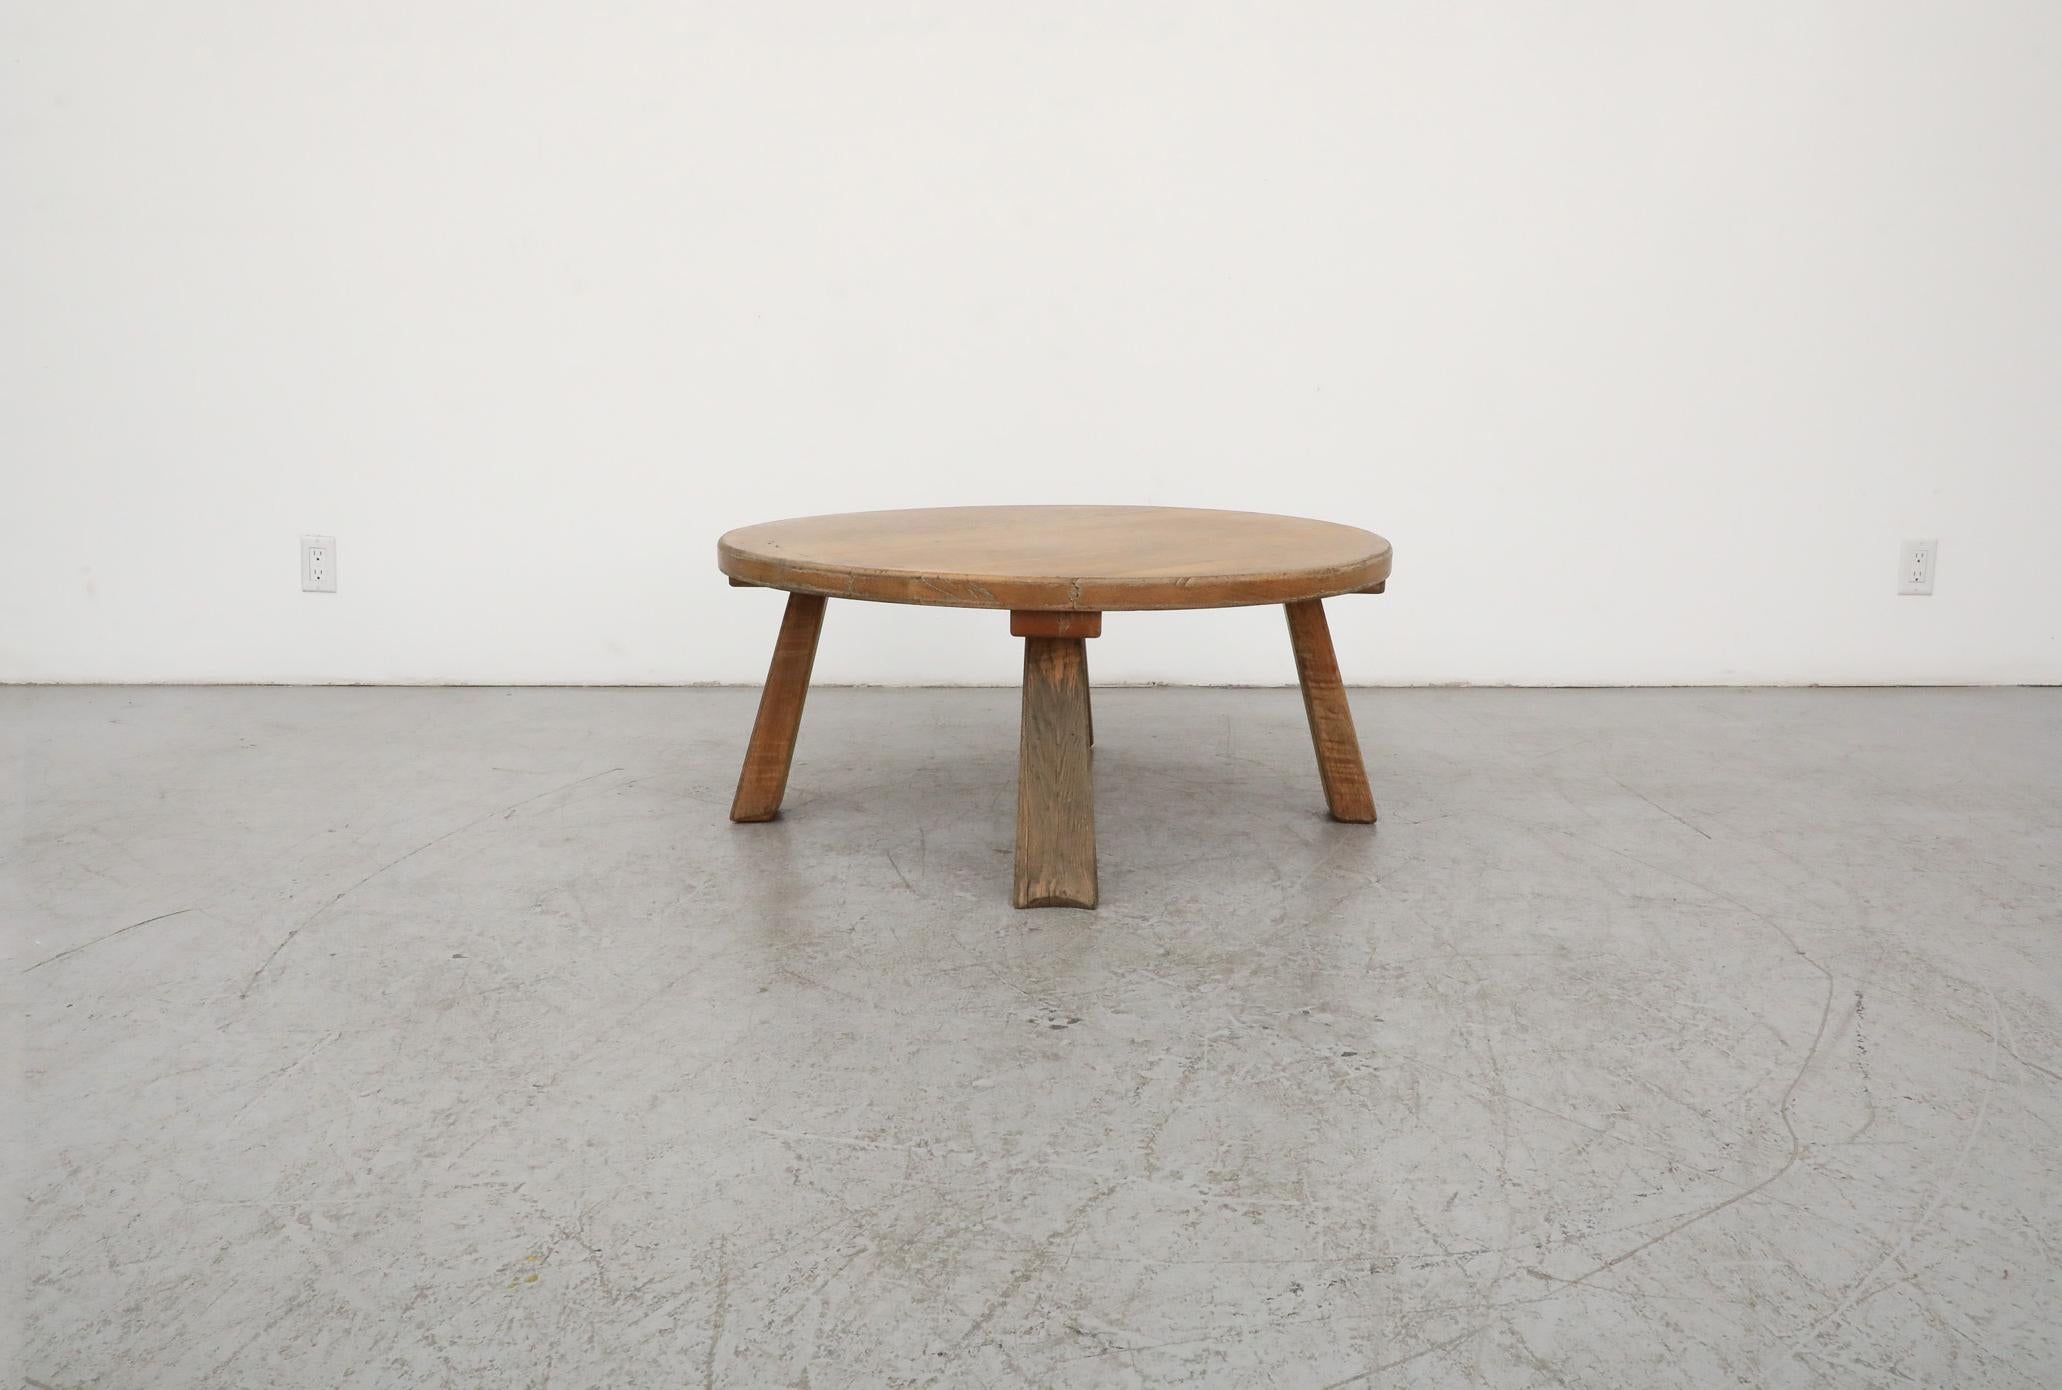 This 1960's, Brutalist Pierre Chapo inspired oak coffee or side table with a solid round top and attractively tapered splayed legs. In very original condition with heavy signs of use and wear including scratches, cracking and stains. This table is